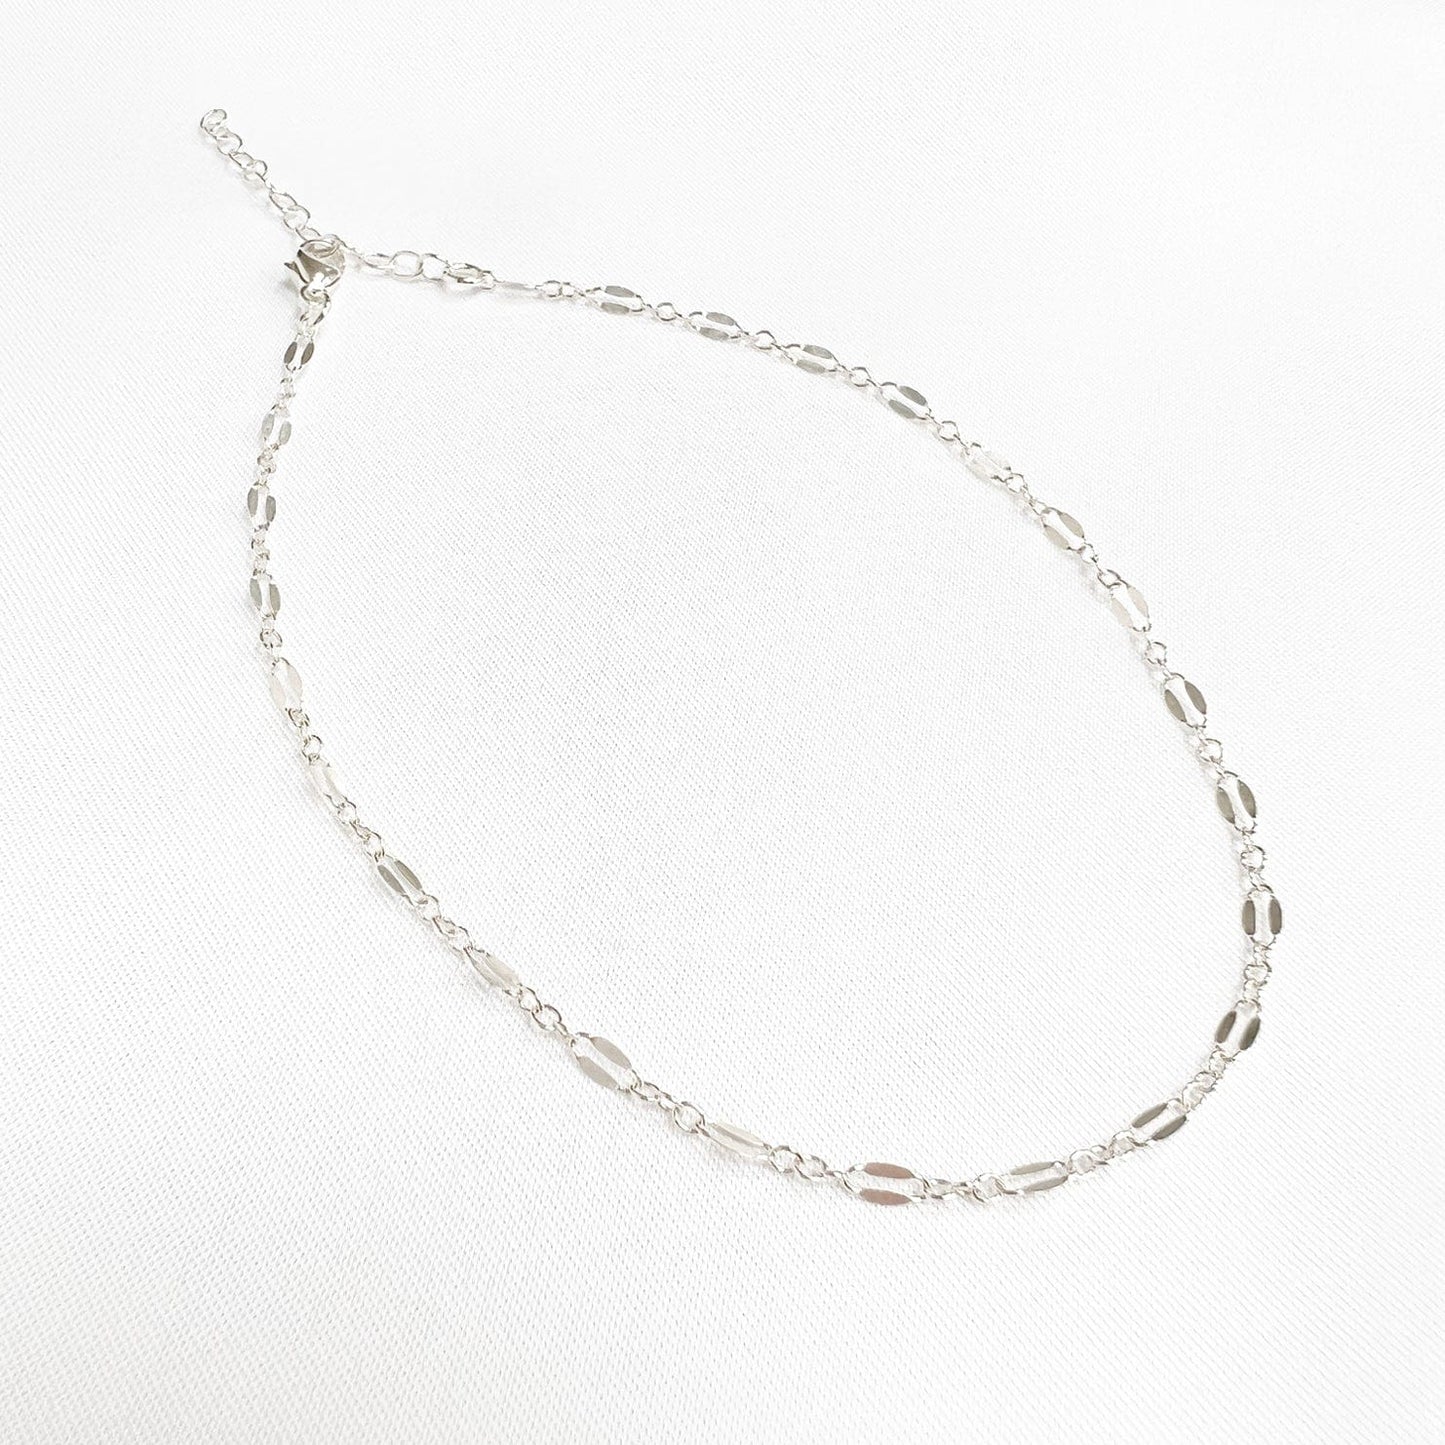 ANK Kamryn Dainty Dapped Sequin Chain Sterling Silver